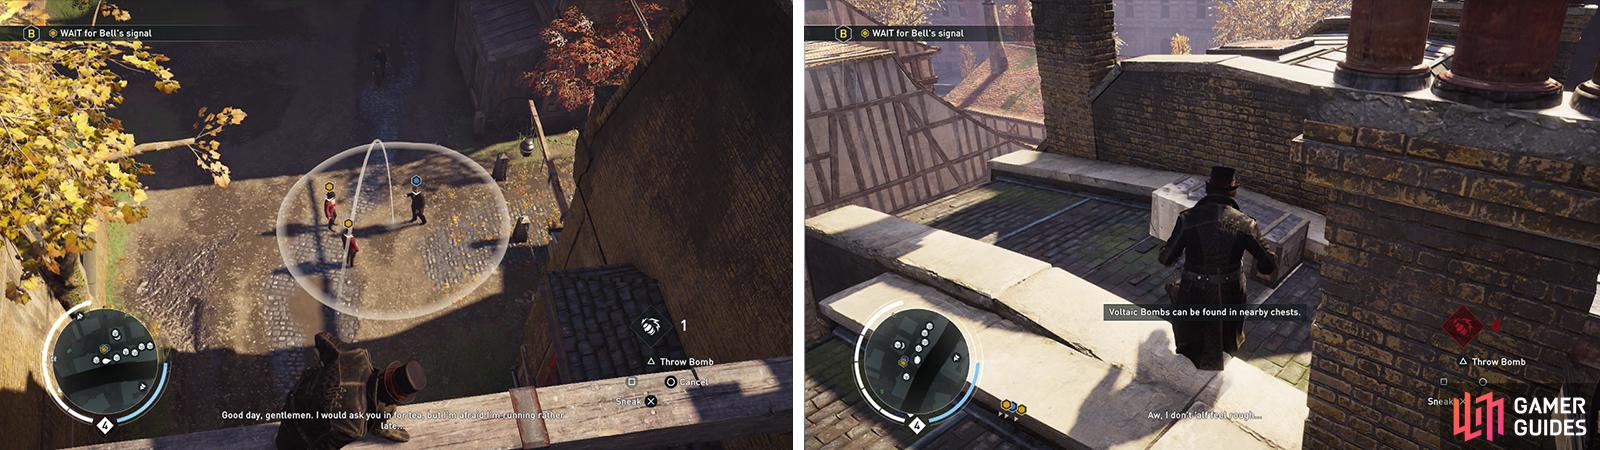 Hit the Thugs with voltaic bombs when prompted (left) and be sure to loot some rooftop chests for additional ammo (right).